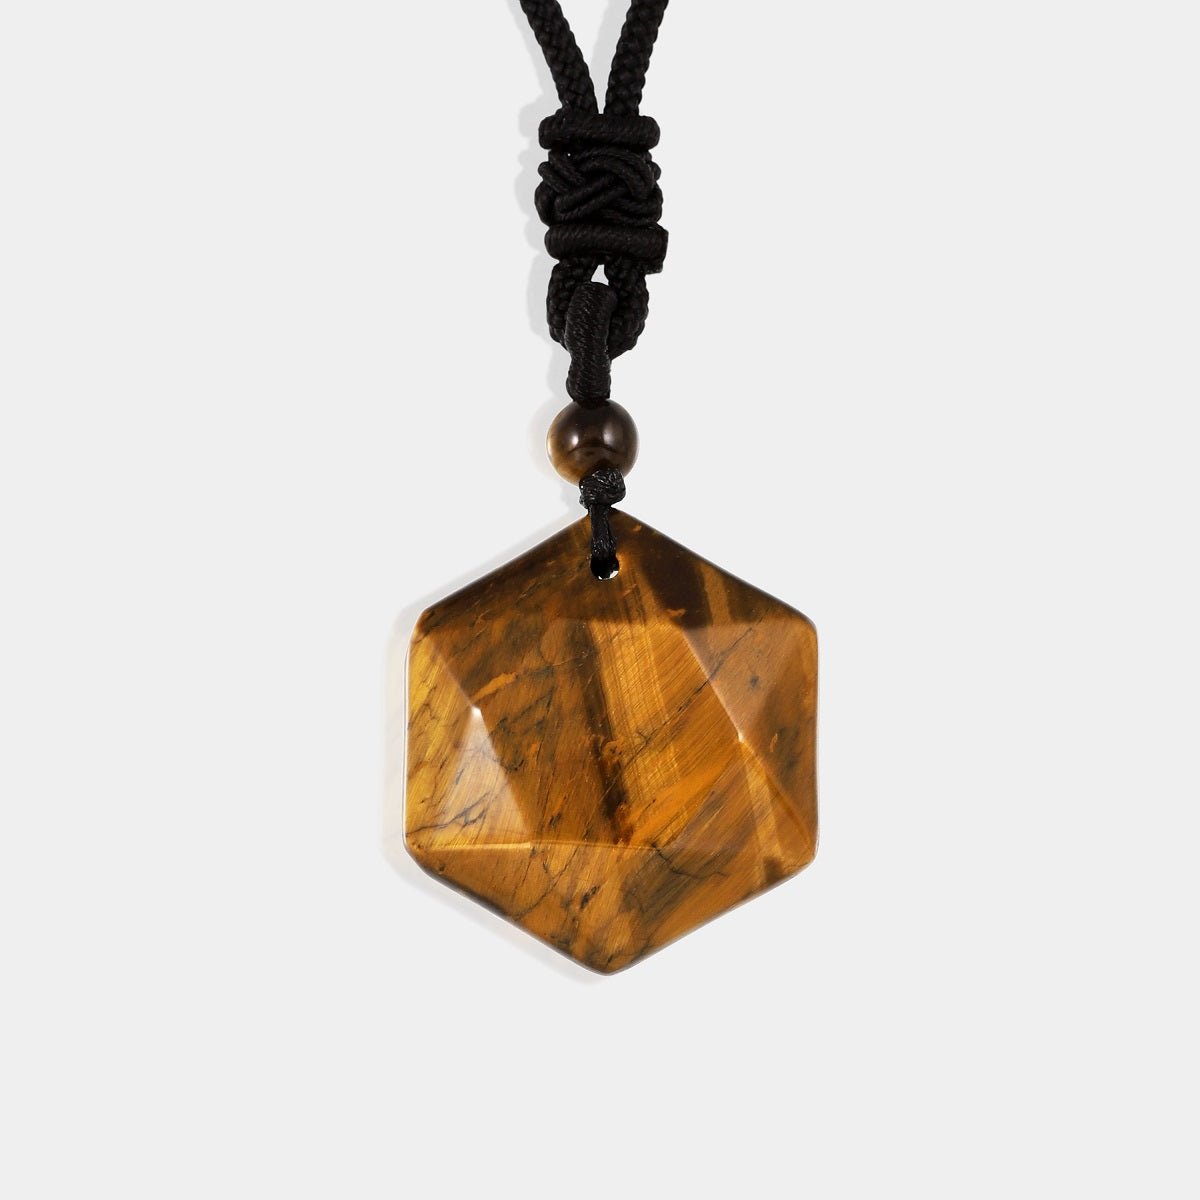 A smooth hexagon-cut Tiger's Eye gemstone, showcasing its mesmerizing golden-brown color and chatoyant effect.